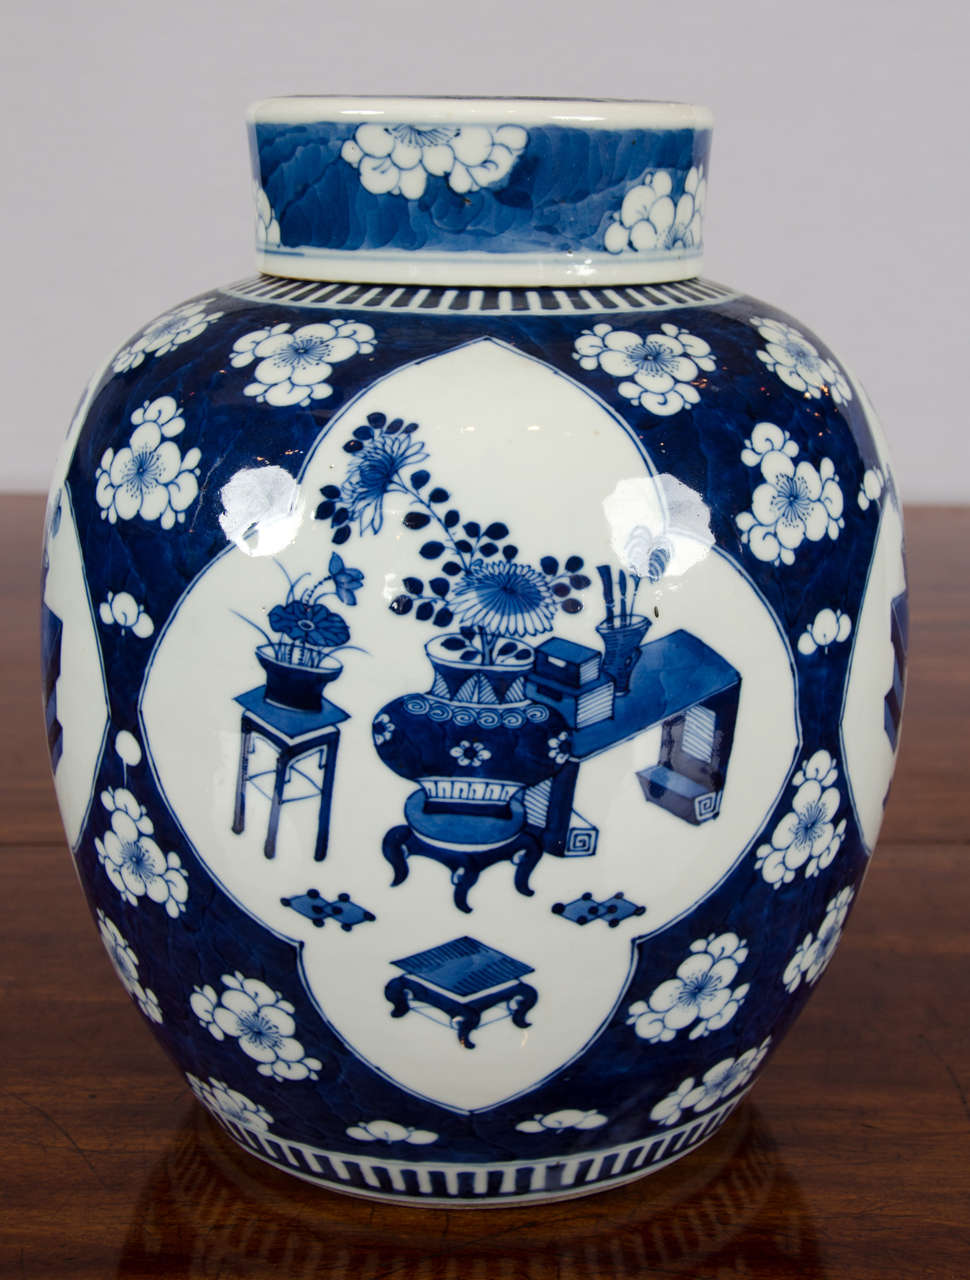 A highly decorative Chinese blue and white ginger jar with matching lid featuring floral and furniture designs. The jar is signed on the bottom and is in excellent condition. It measures 11 ½ in – 29.3 cm in height with a diameter of 9 ½ in – 24 cm.